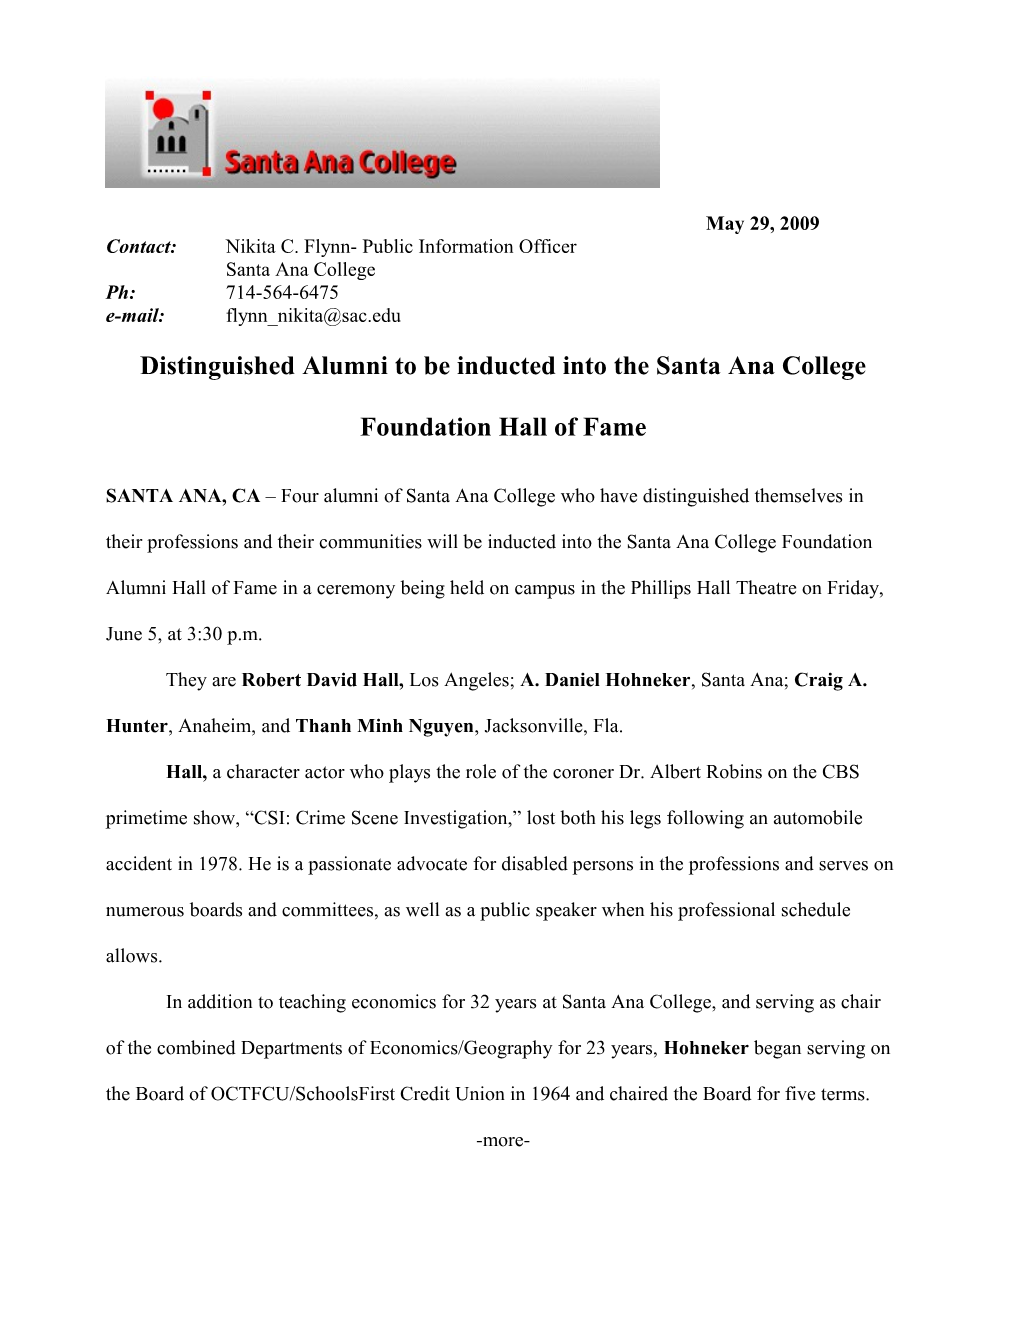 Distinguished Alumni to Be Inducted Into the Santa Ana College Foundation Hall of Fame